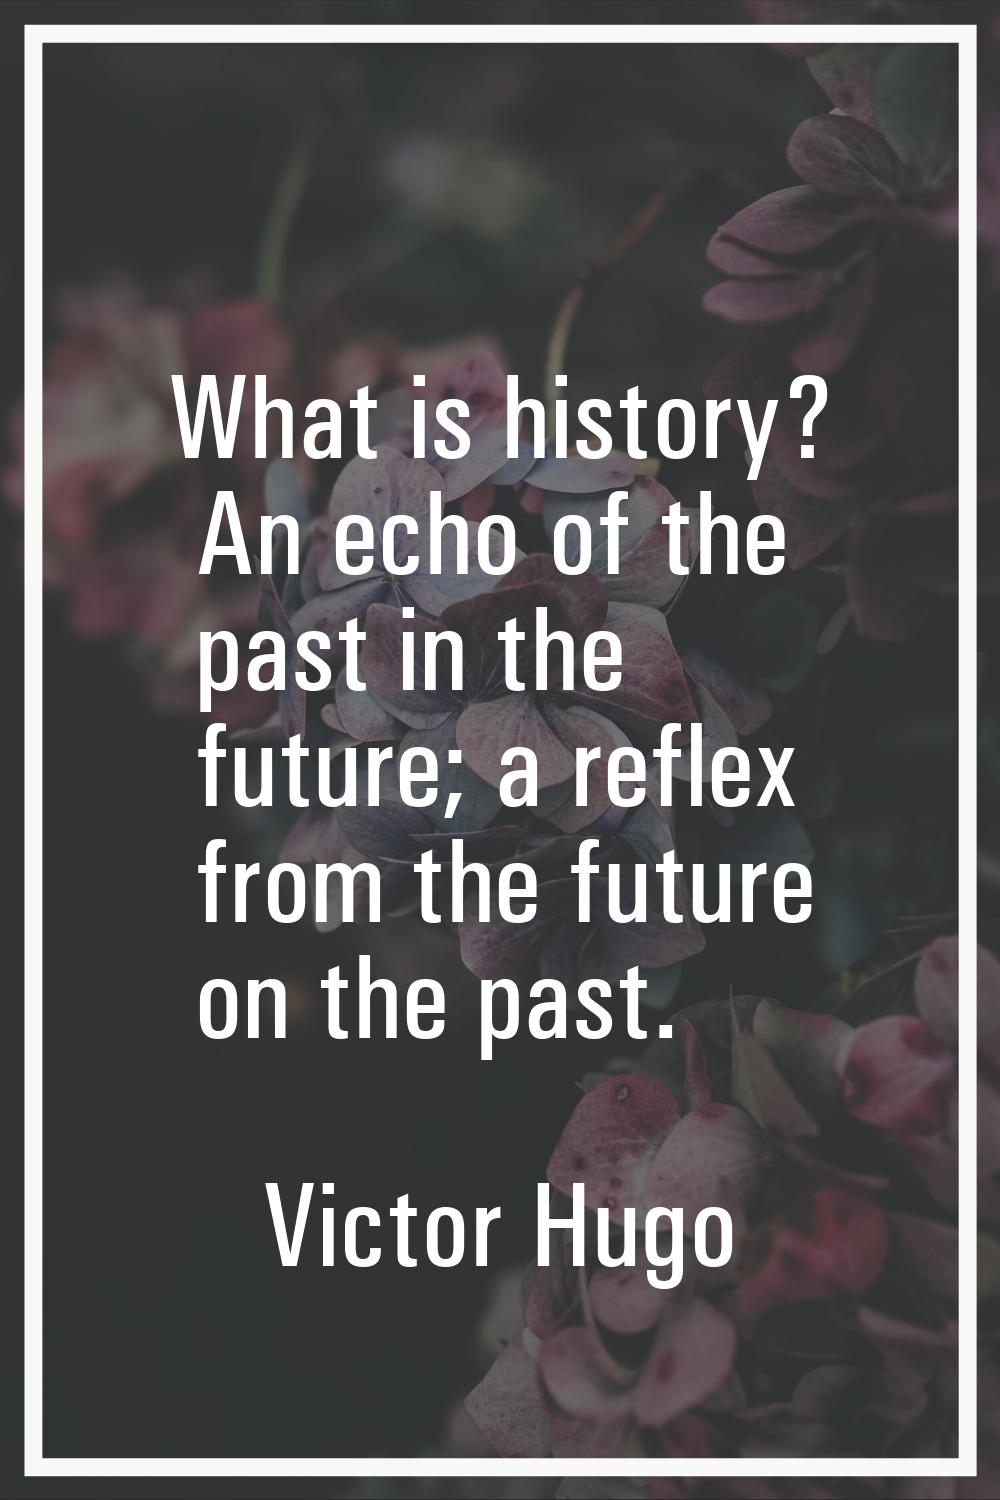 What is history? An echo of the past in the future; a reflex from the future on the past.